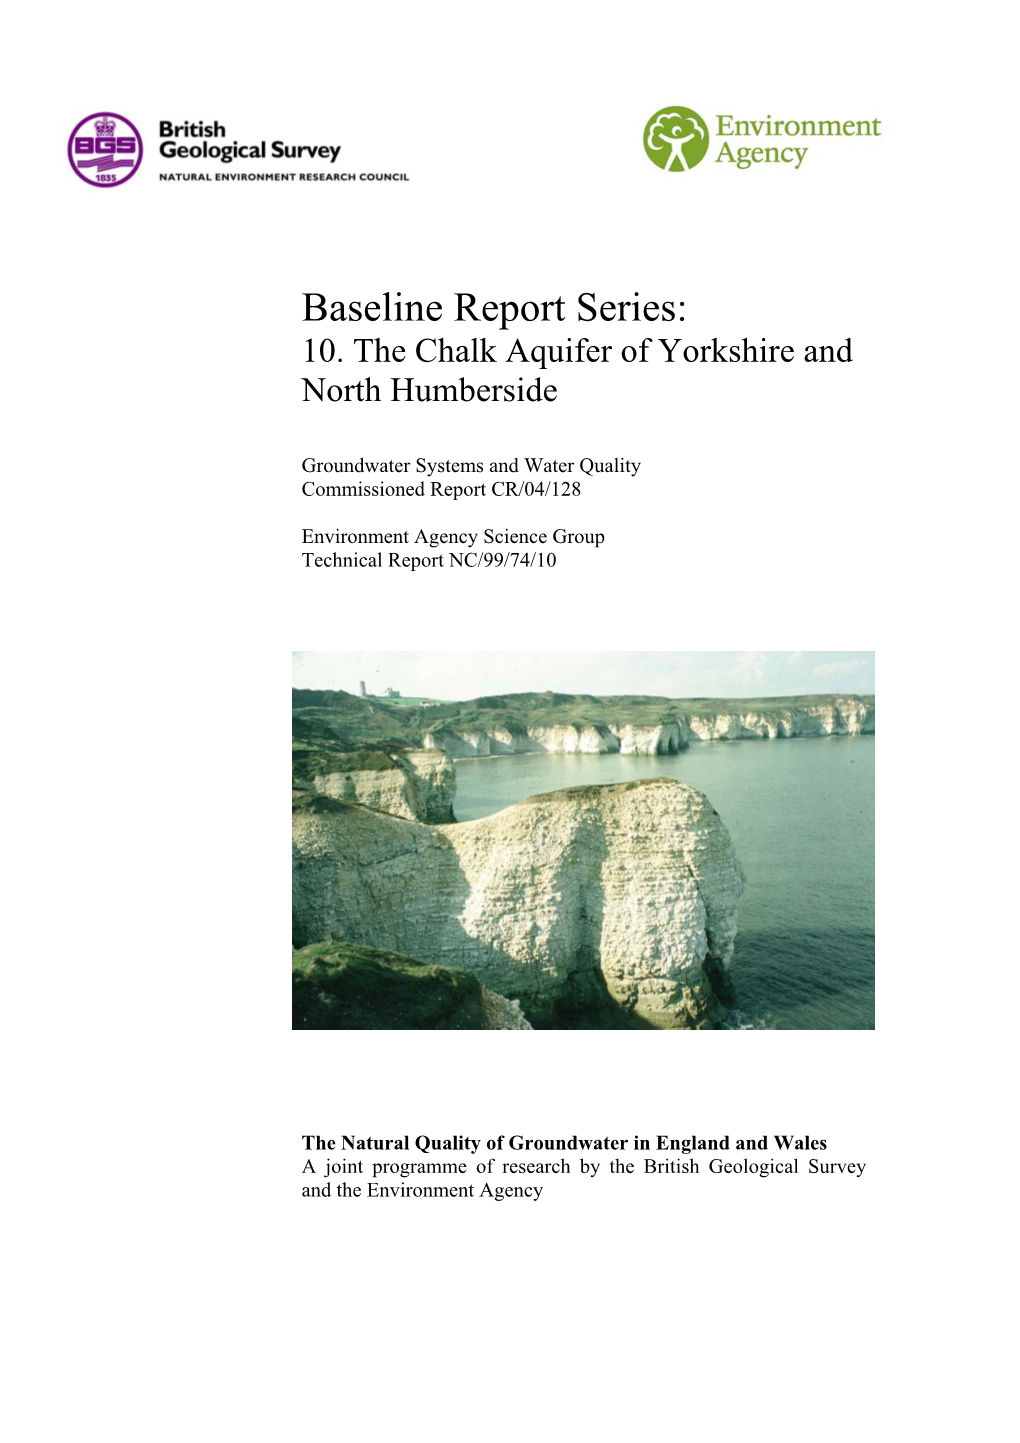 Baseline Report Series: 10. the Chalk Aquifer of Yorkshire and North Humberside